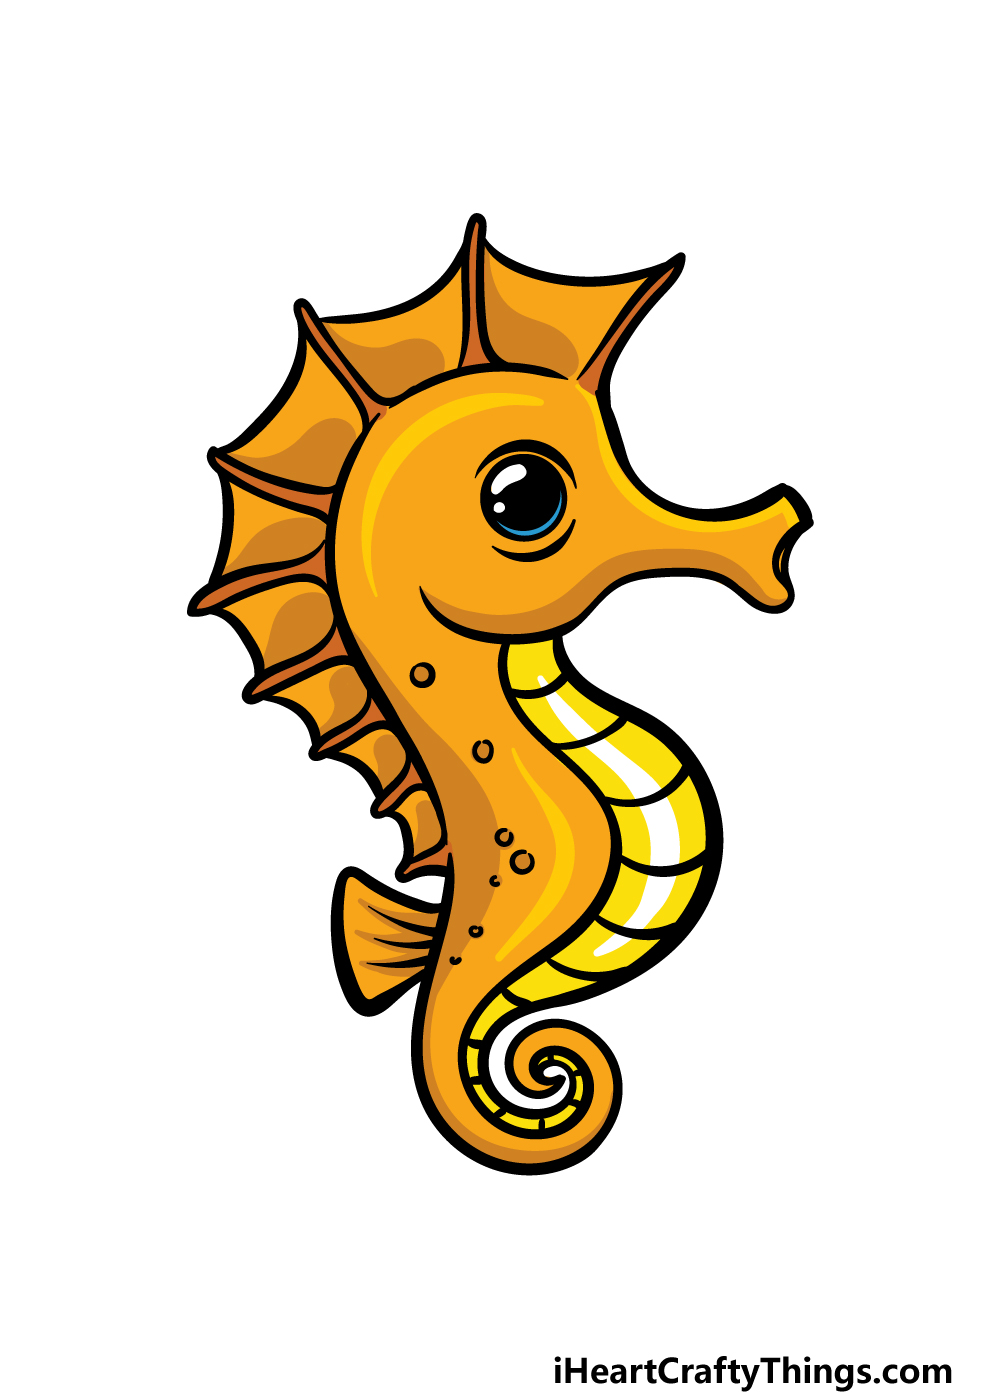 Cartoon Seahorse Drawing - How To Draw A Cartoon Seahorse Step By